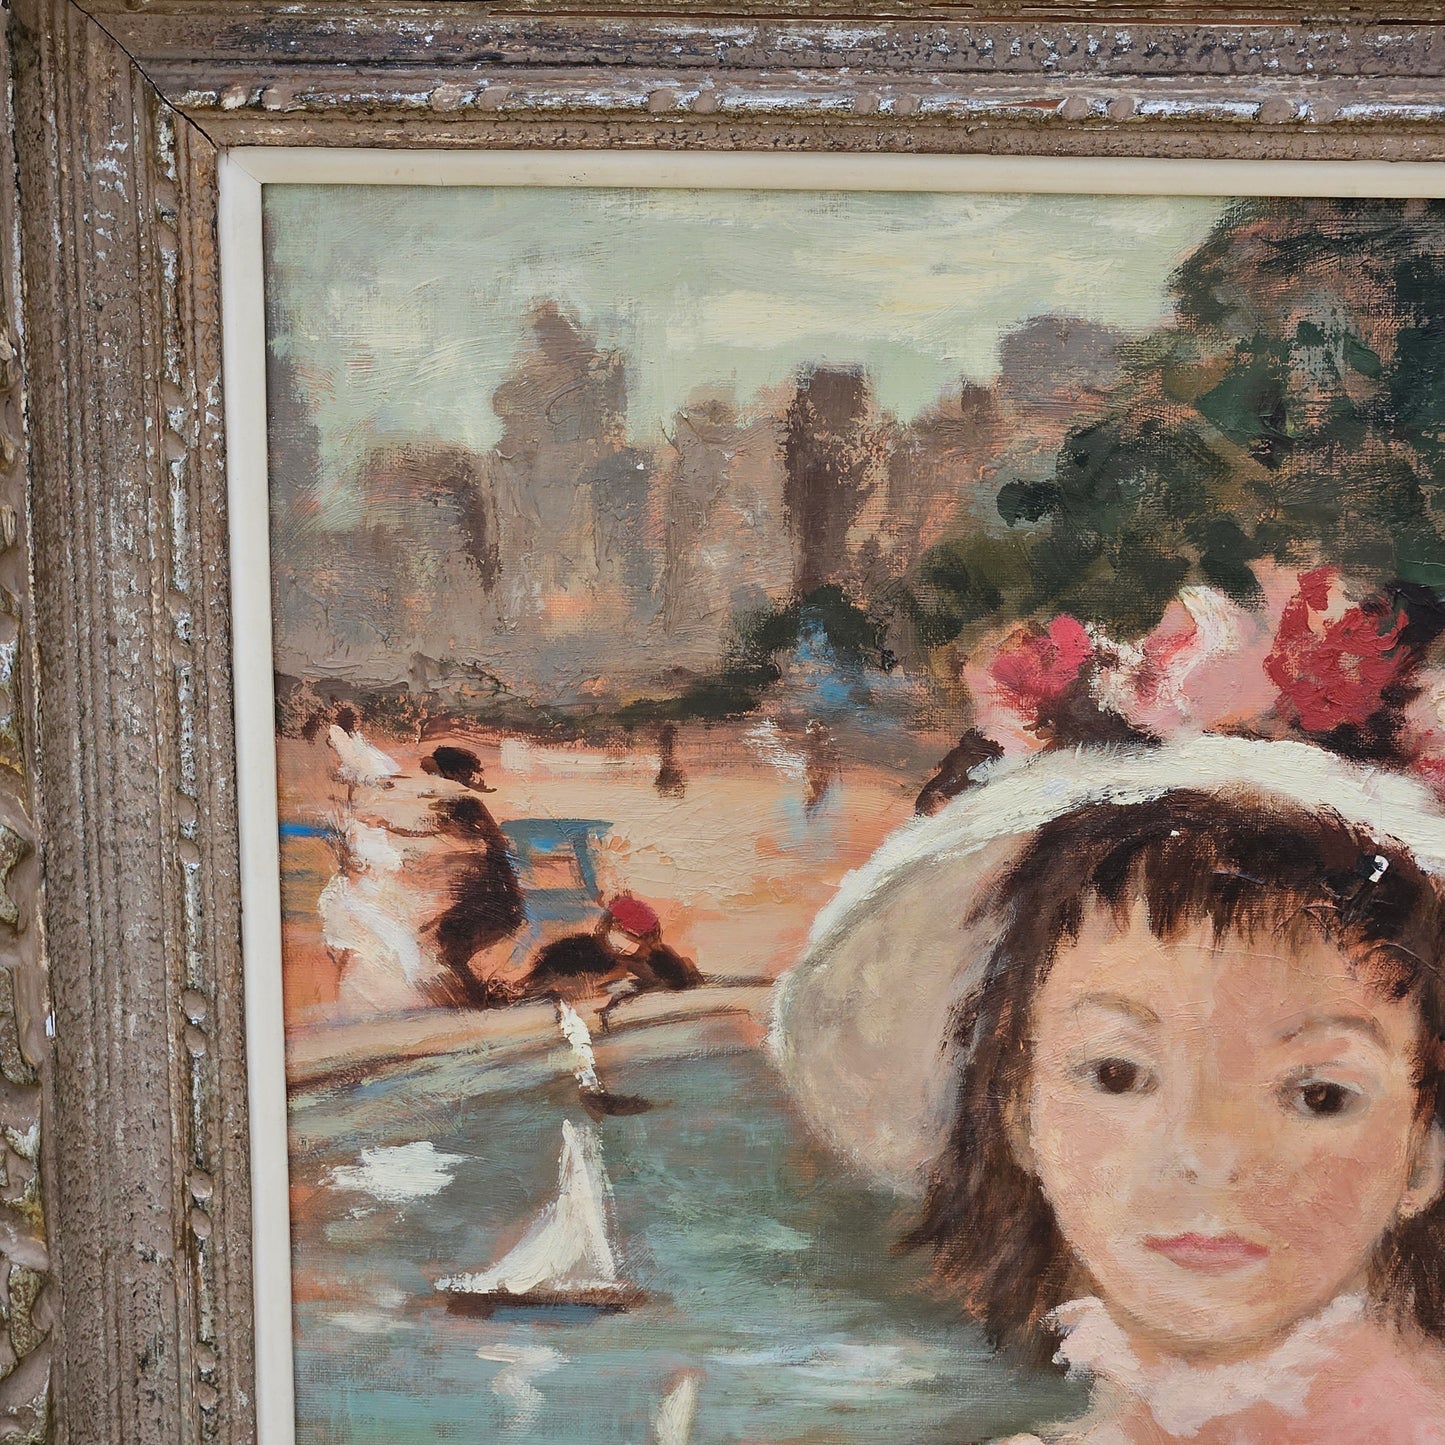 Impressionist Dietz Edzard Style Portrait of Young Girl at the Seaside Signed "Benayzard"